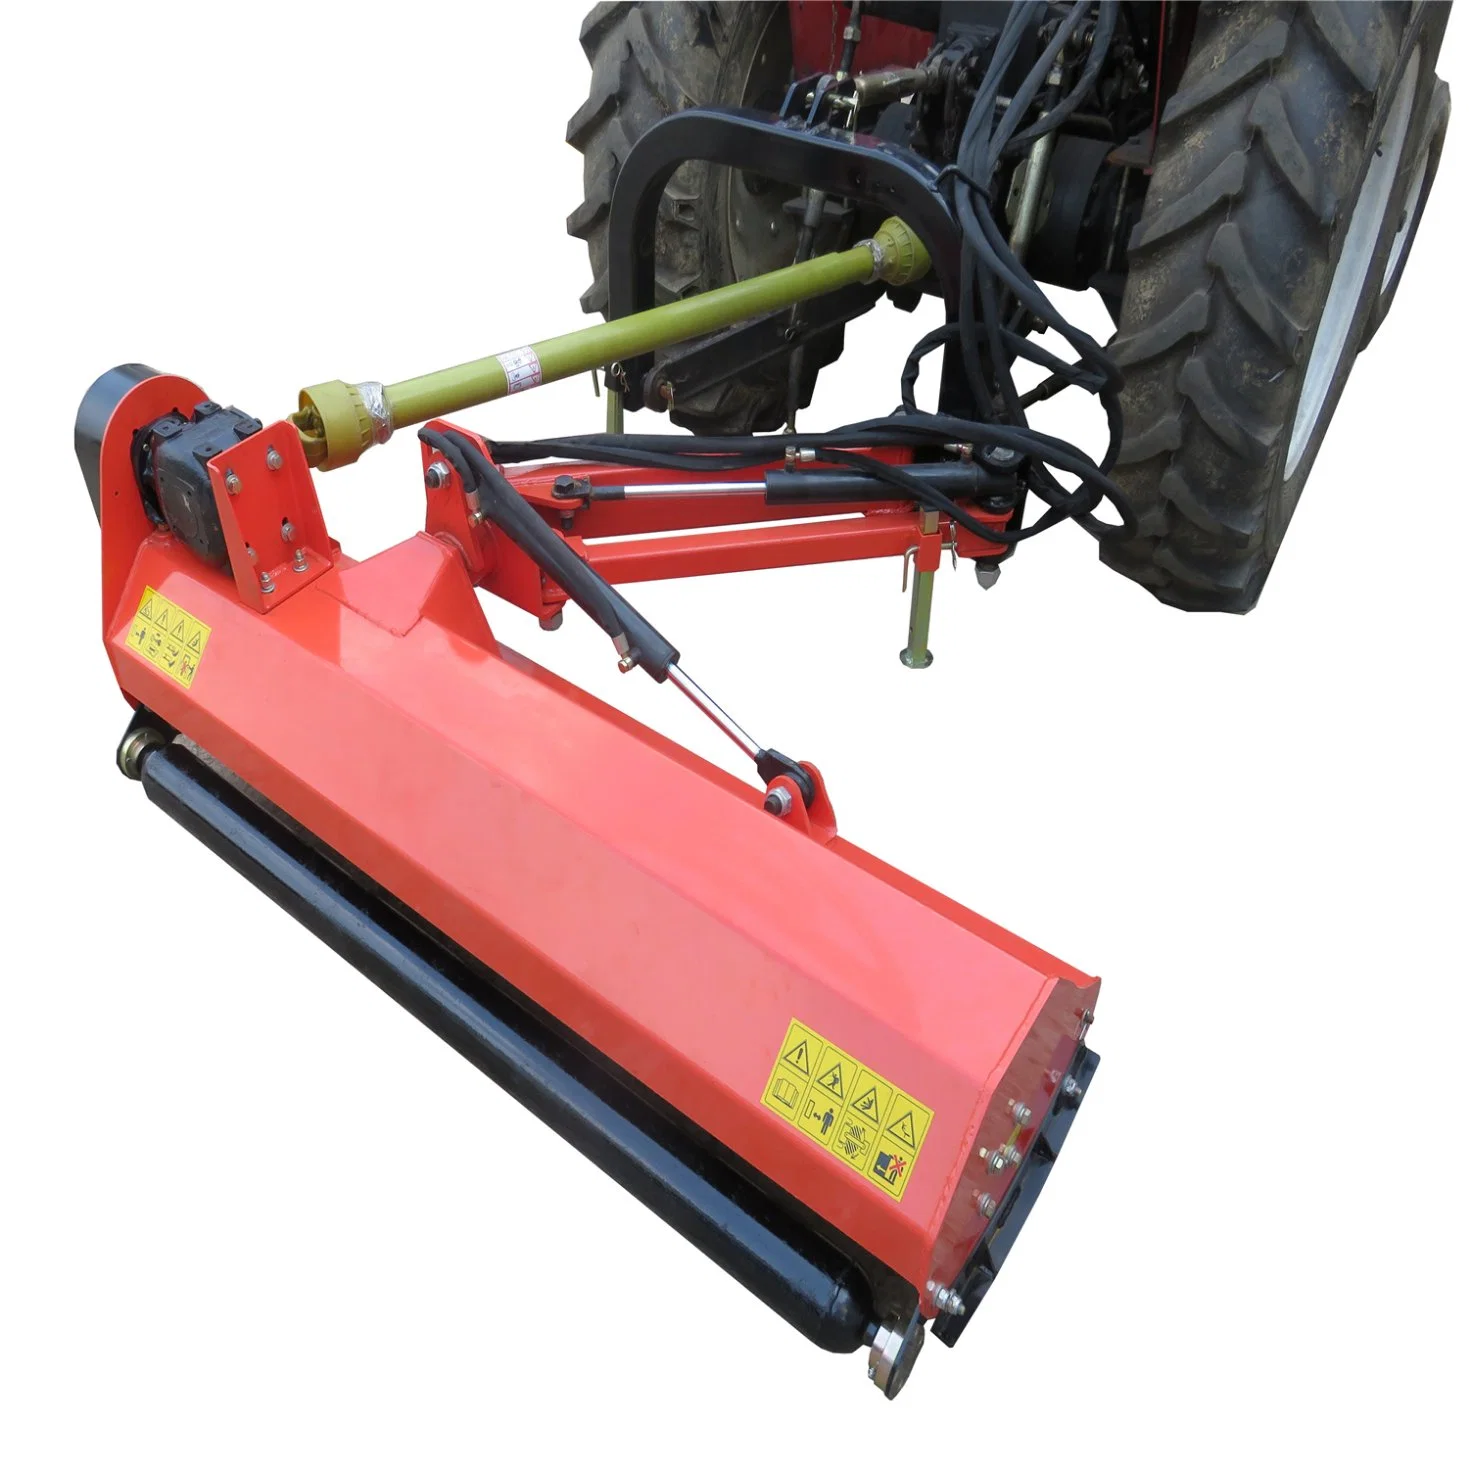 Rotary Cut Mower for Compact Tractors / Tractor Lawn Mower / Mower for Tractor